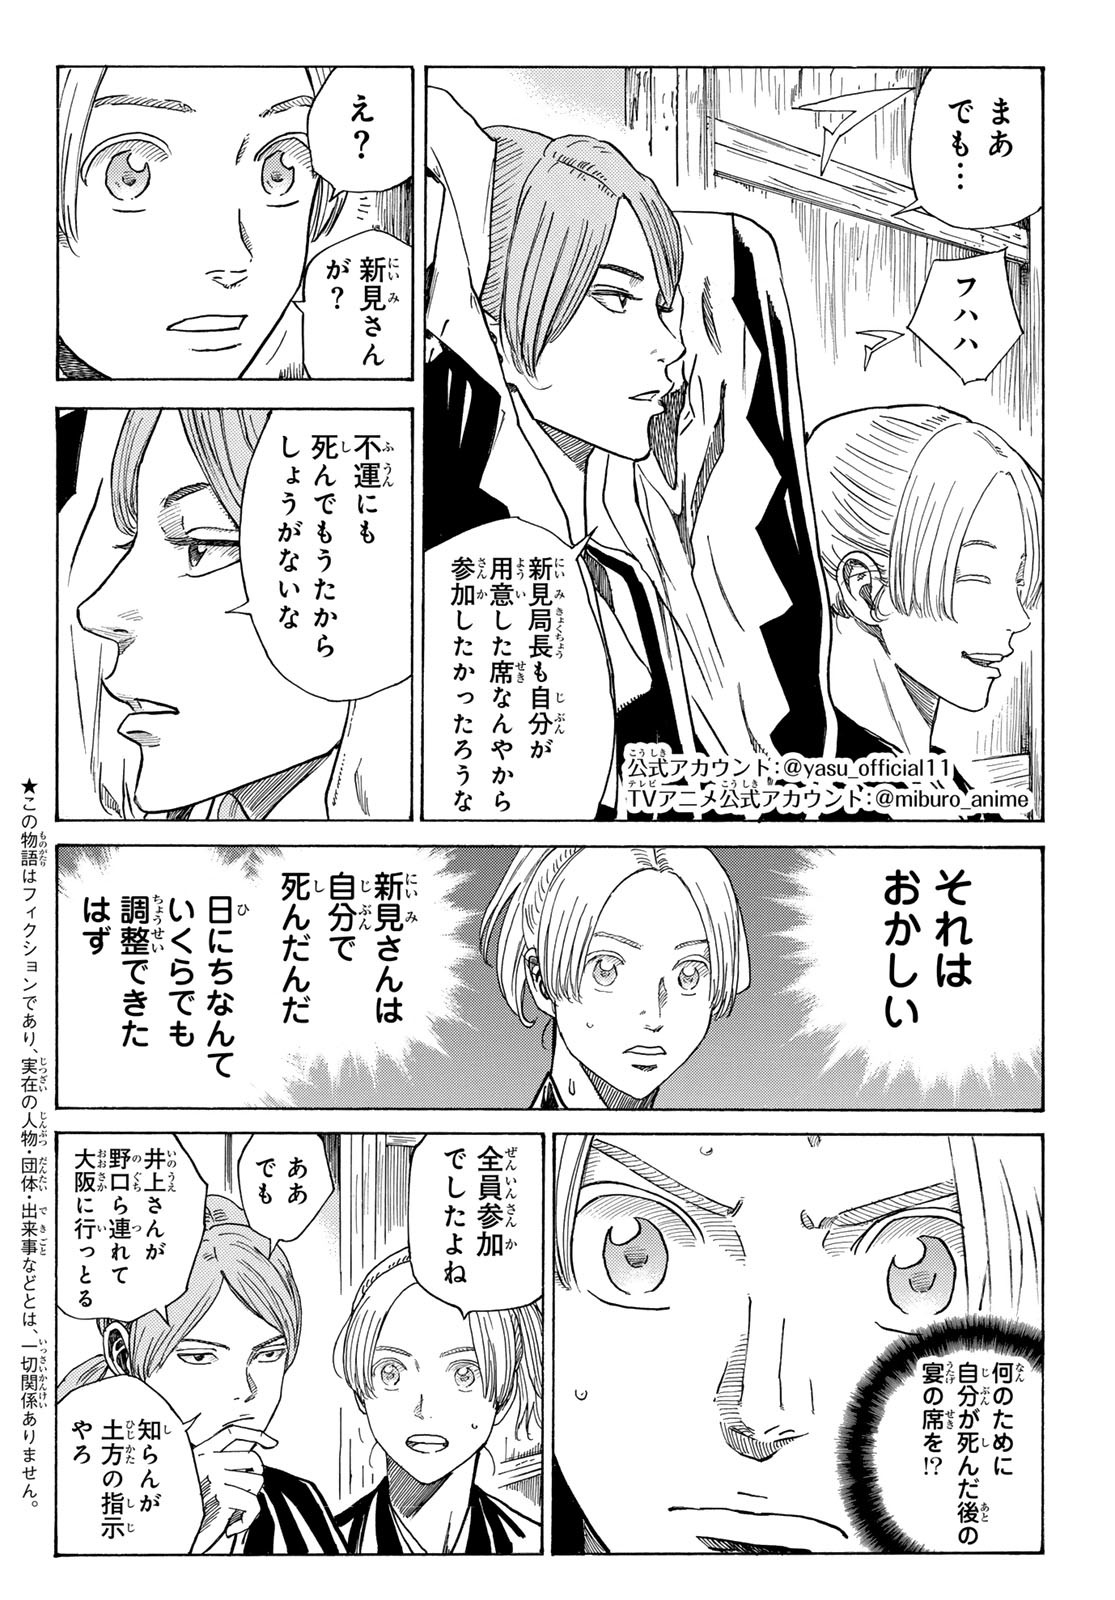 An Mo Miburo 第98話 - Page 2